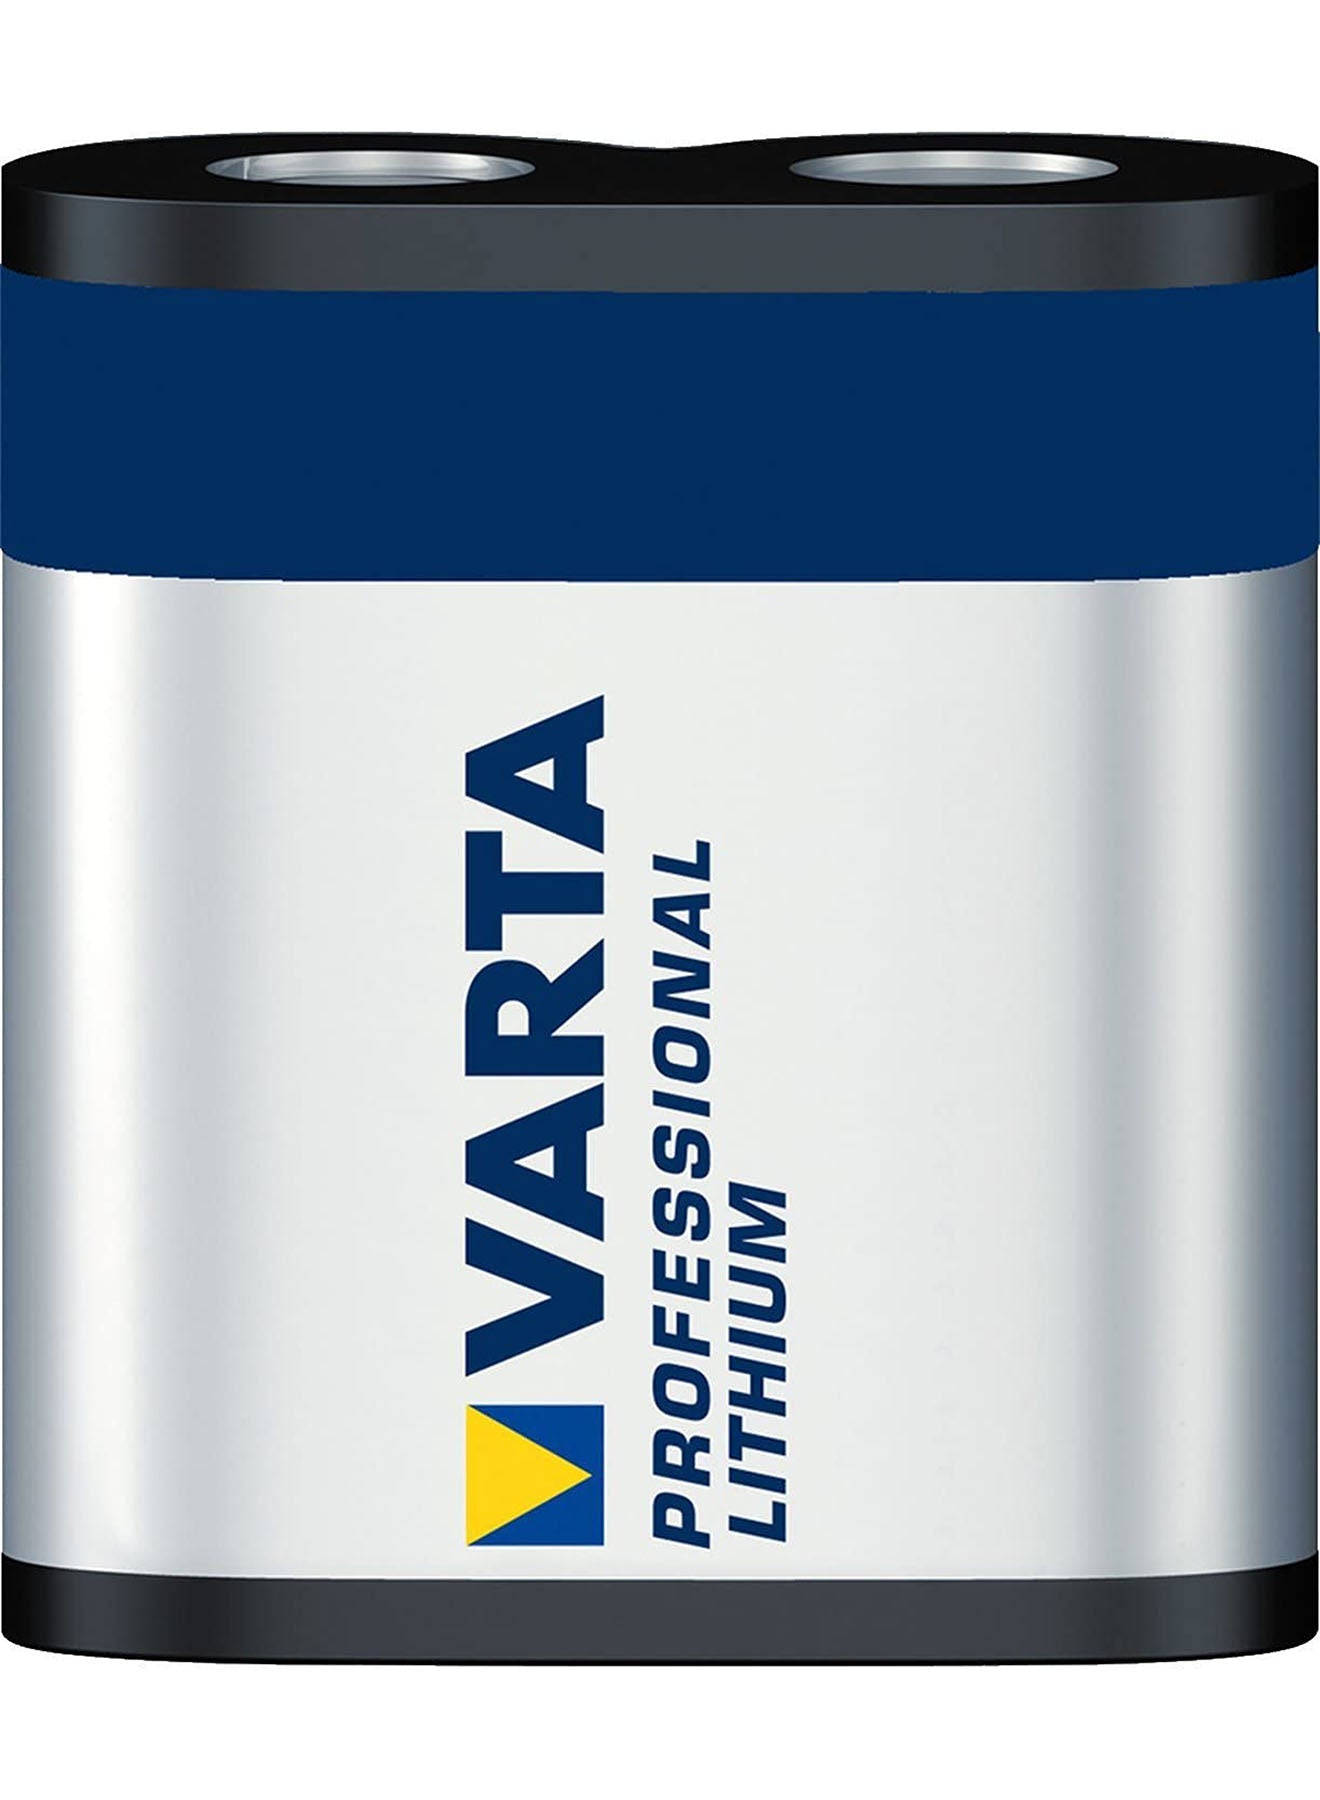 Varta Lithium CRP2 Professional battery Value Pack of 2 